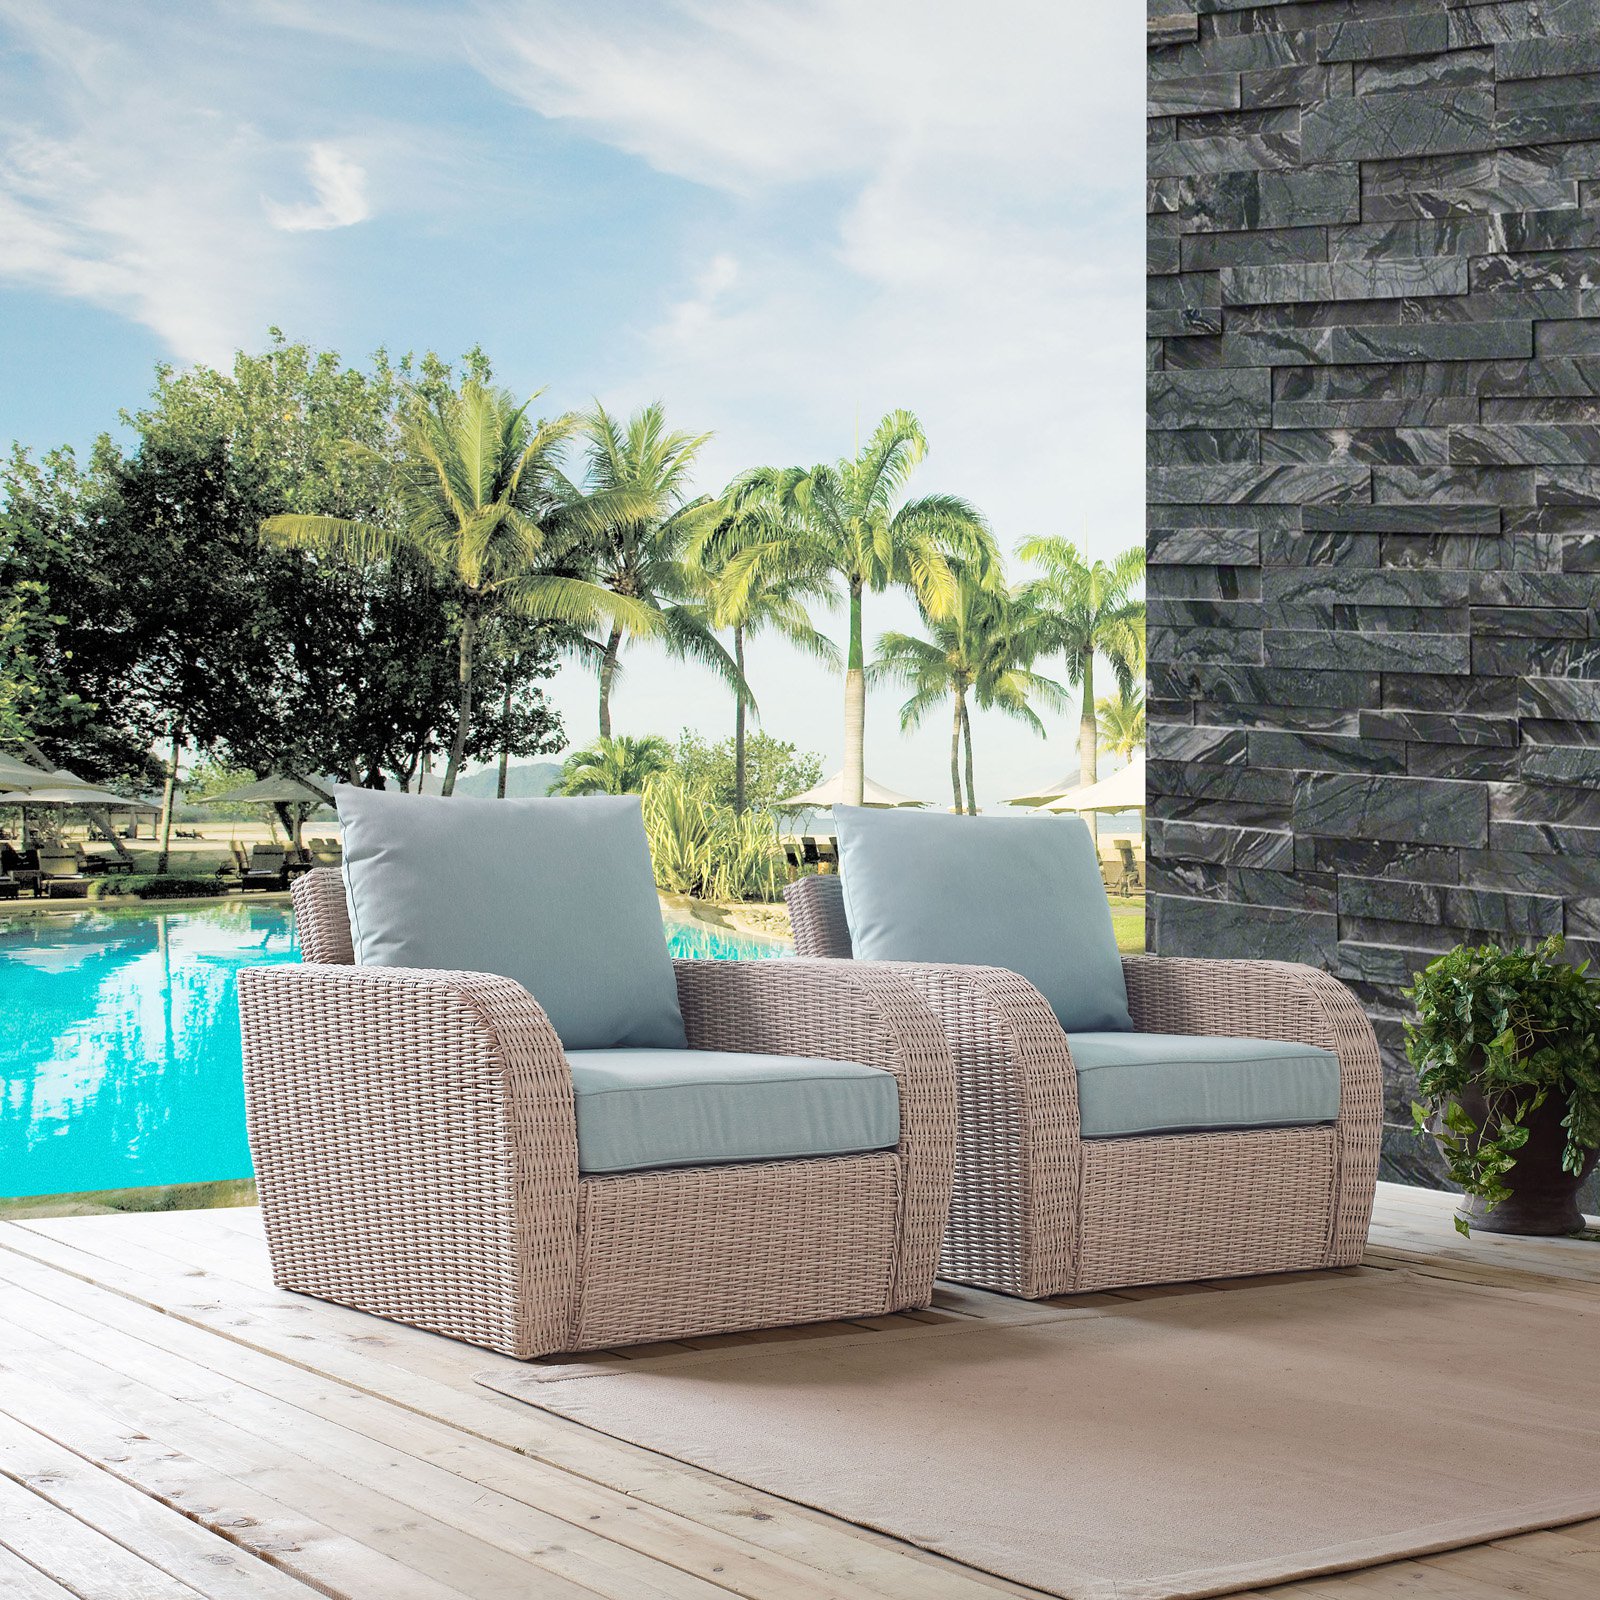 Crosley Furniture St Augustine 2 Pc Outdoor Wicker Seating Set With Mist Cushion - Two Outdoor Wicker Chairs - image 2 of 11